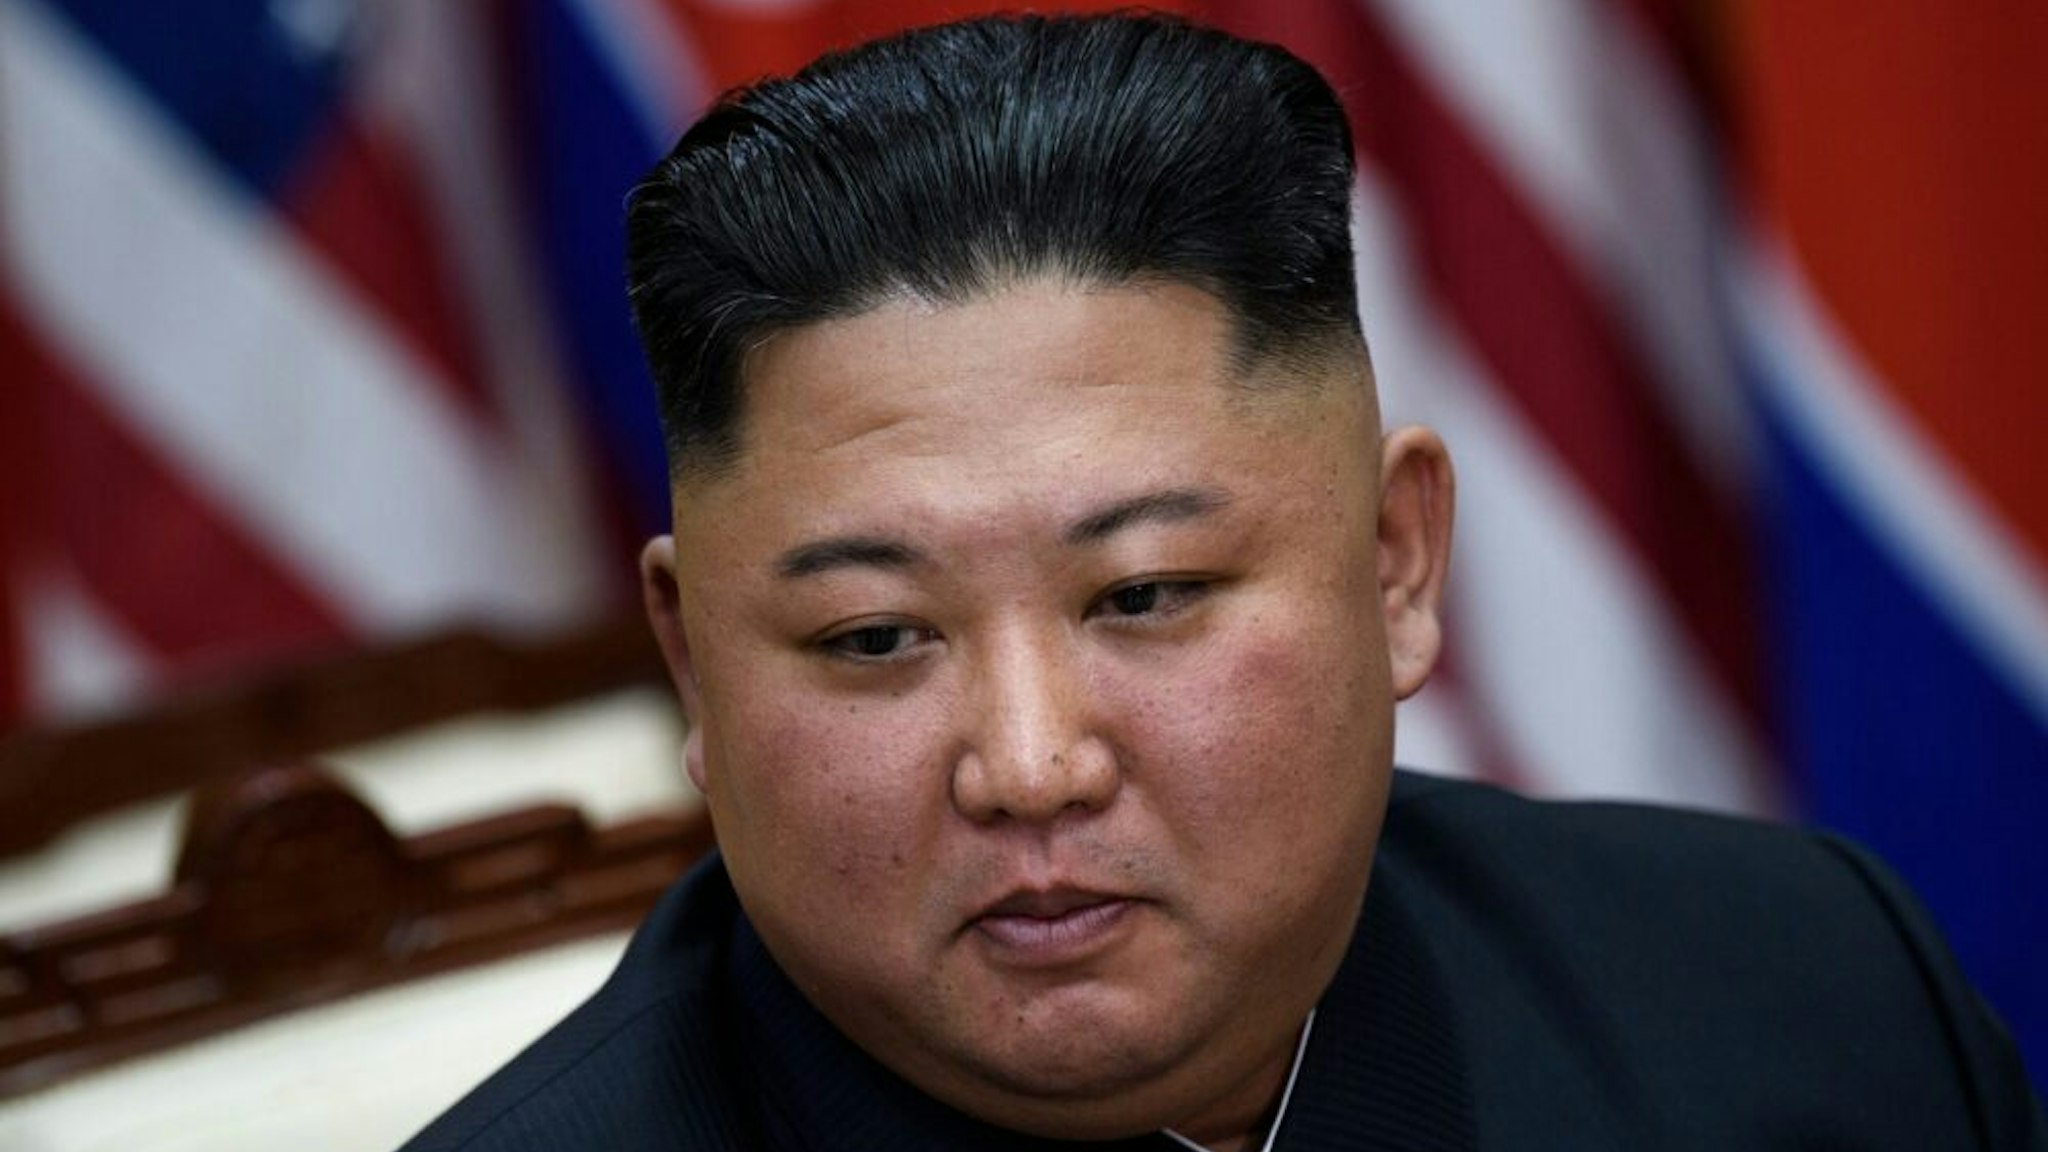 TOPSHOT - North Korea's leader Kim Jong Un before a meeting with US President Donald Trump on the south side of the Military Demarcation Line that divides North and South Korea, in the Joint Security Area (JSA) of Panmunjom in the Demilitarized zone (DMZ) on June 30, 2019.